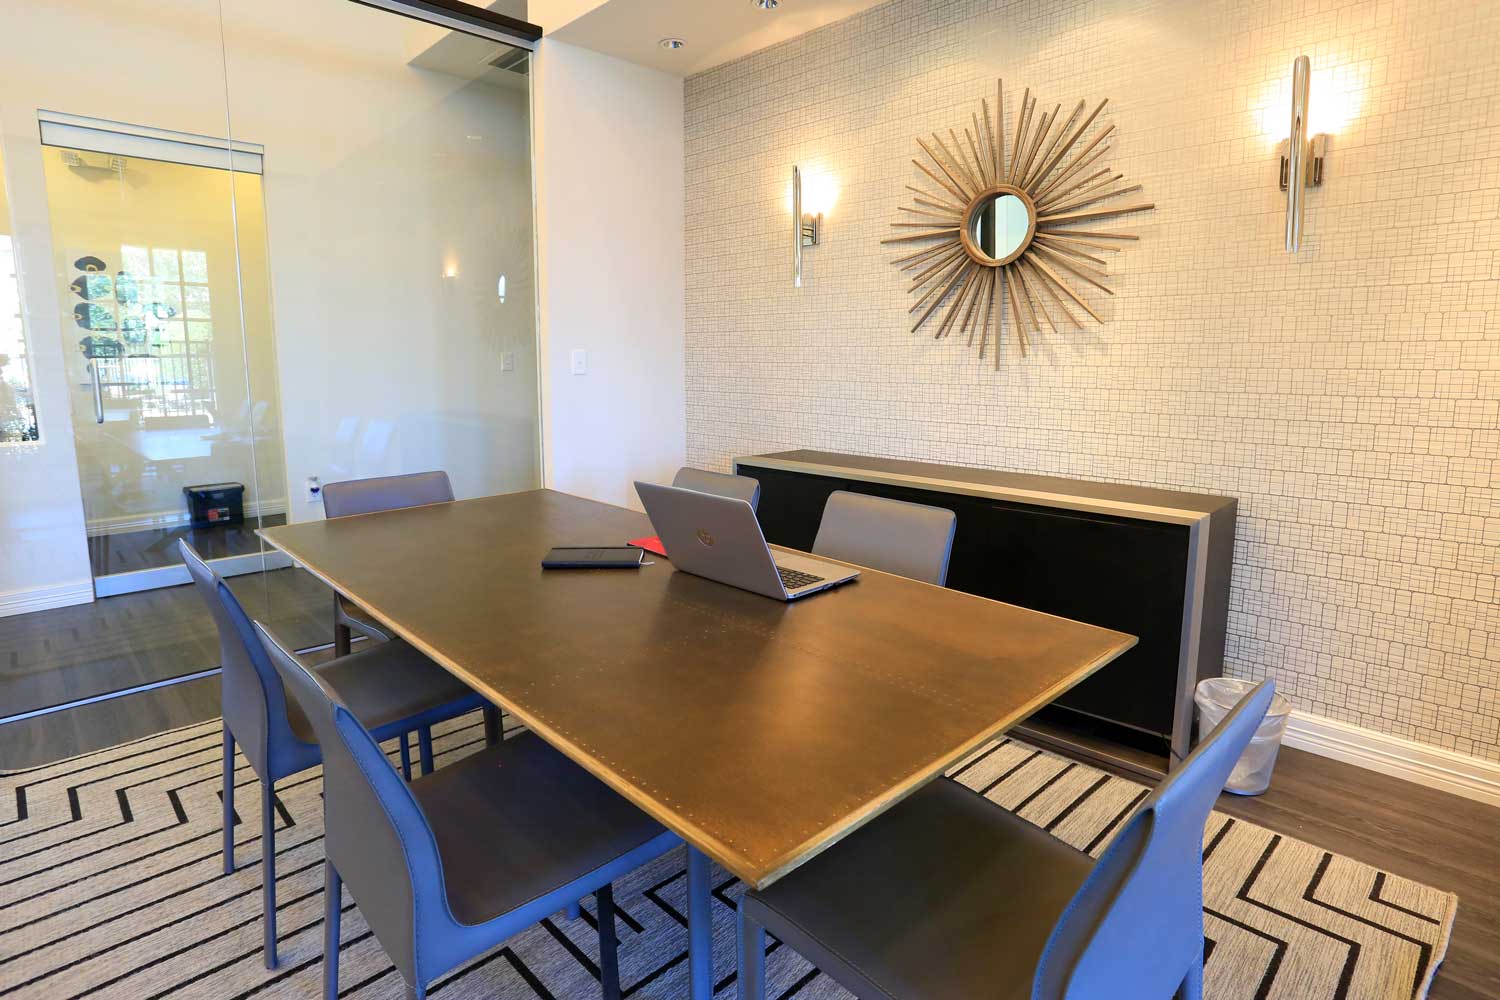 Conference Room Available at Pinnacle Ridge Apartments in Dallas, Texas